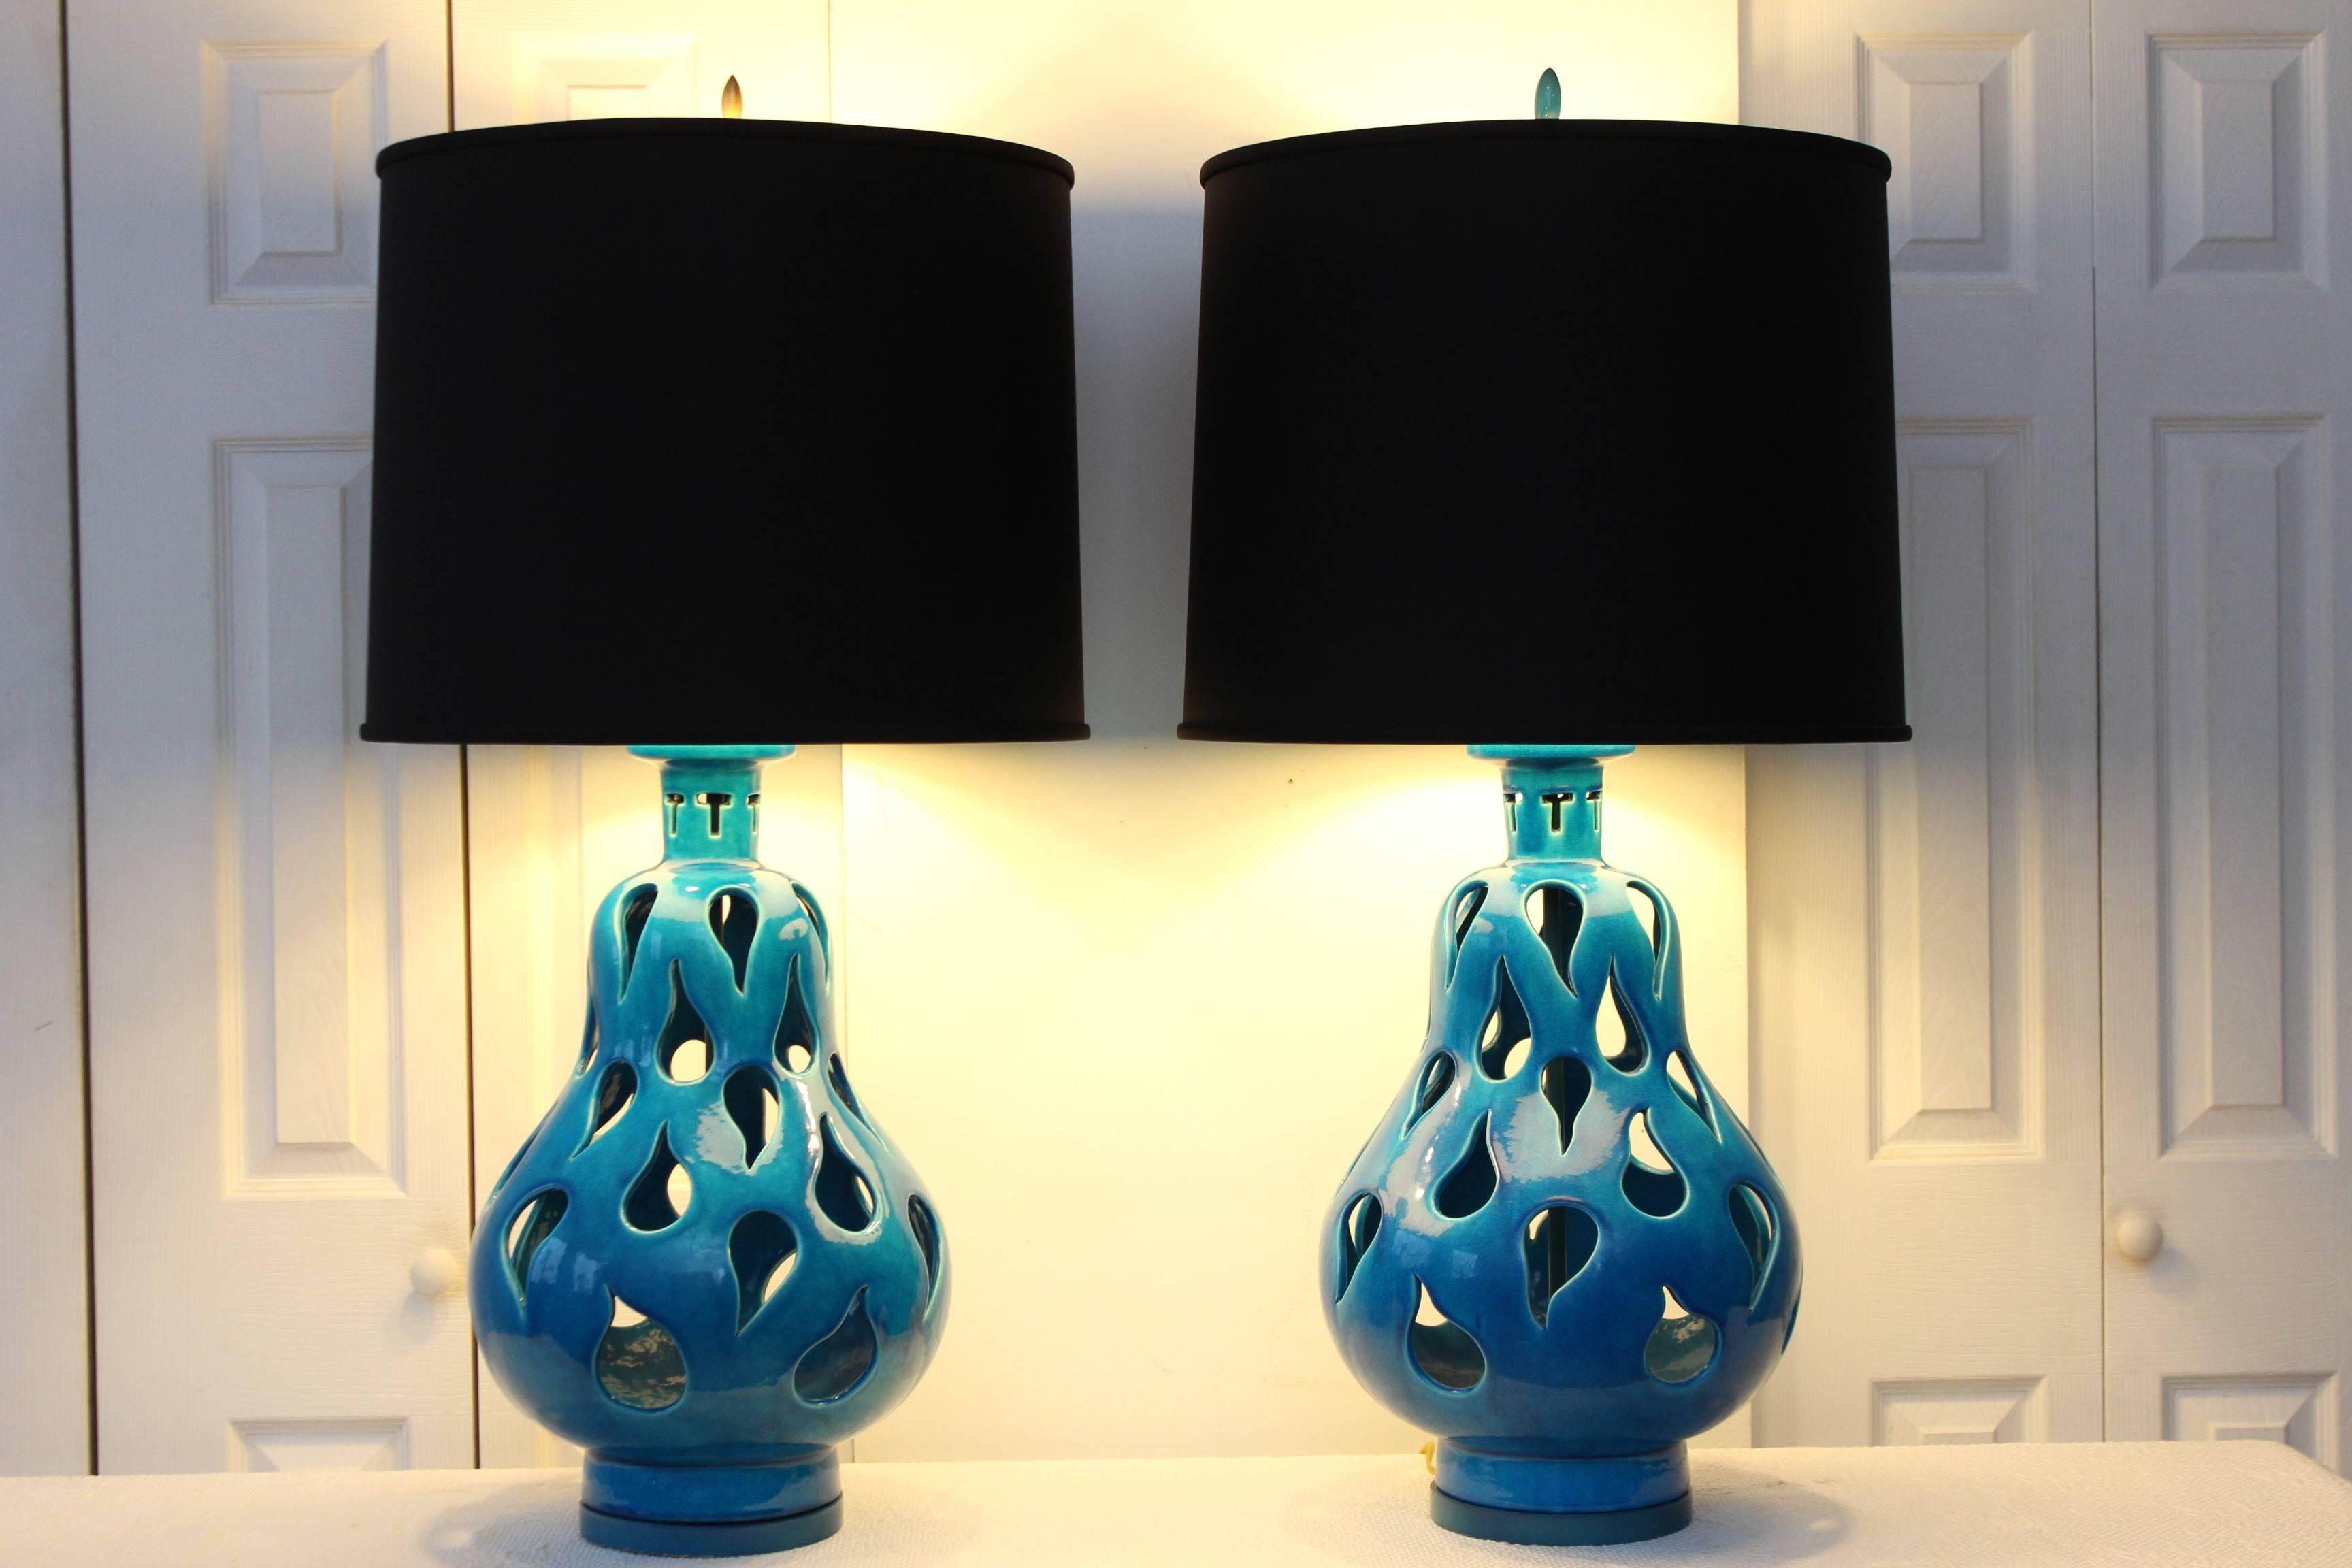 Exquisite. High design. Elegance. Seductive. These are just a few words that come to mind when describing these impressive works of art. Acquired from an estate in Chicago, these lamps have a connection with Edith 